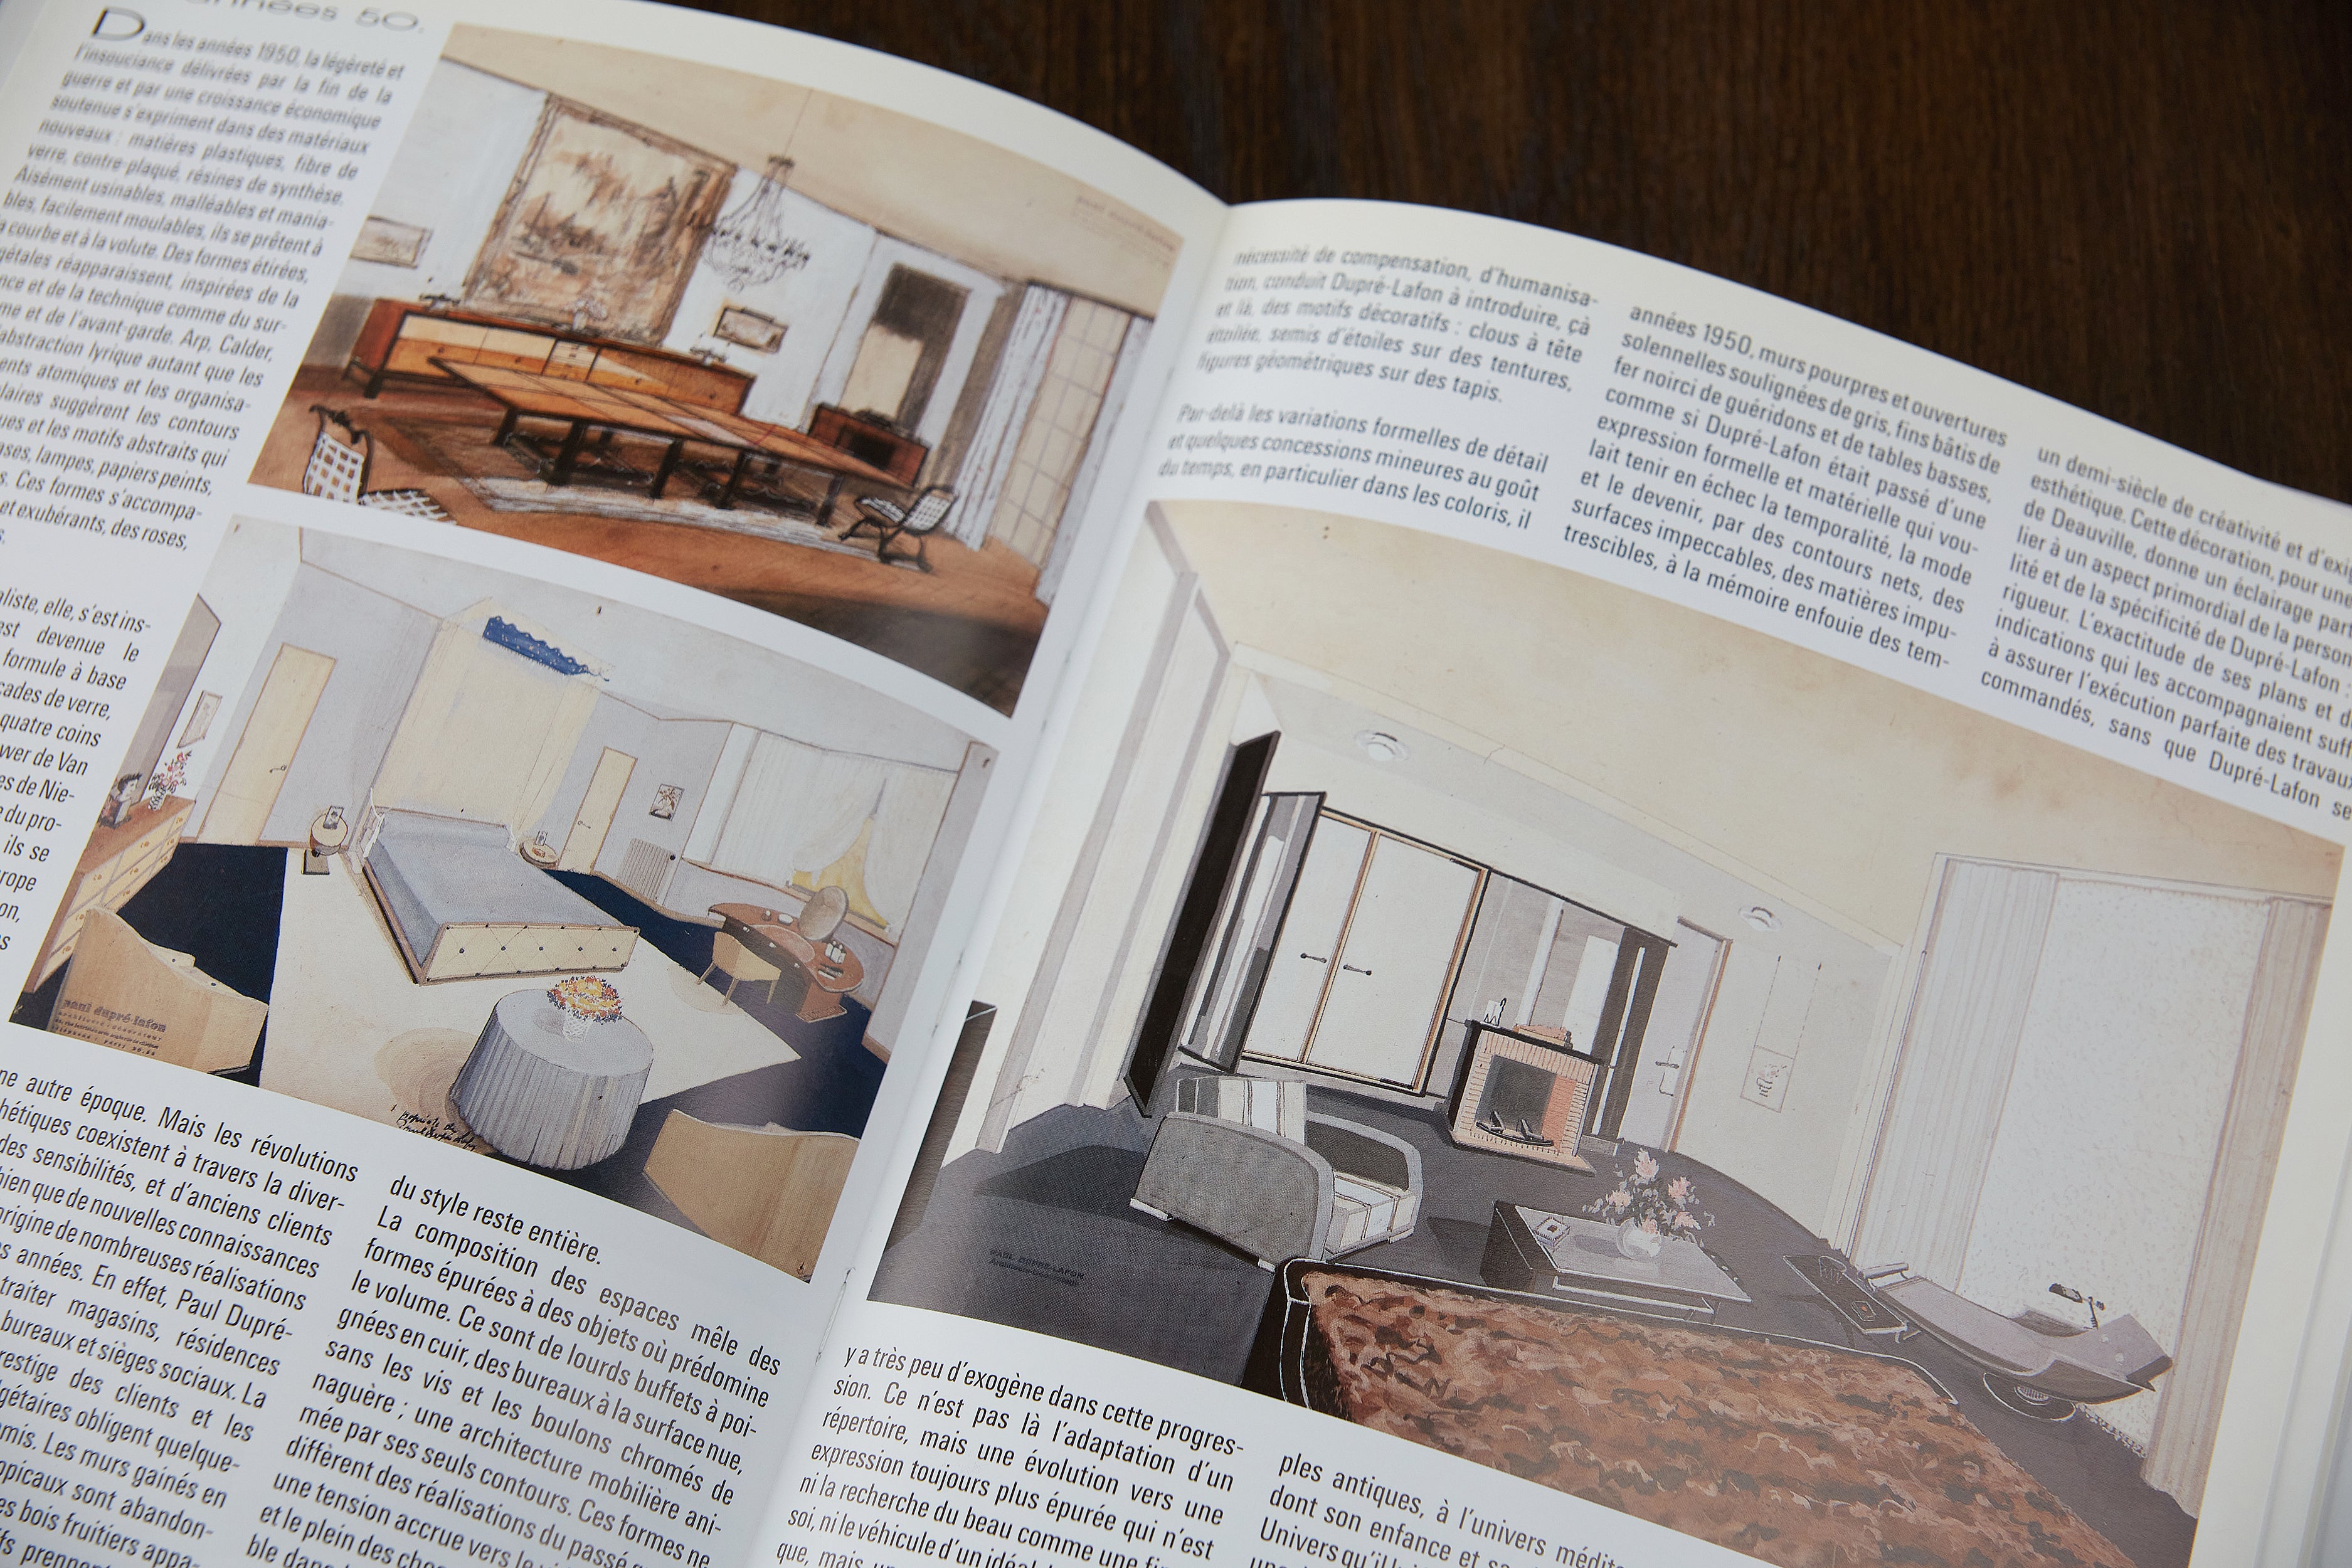 Spread from book in How Paul Dupré-Lafon Became ‘The Decorator of Millionaires’ for A Collected Man London